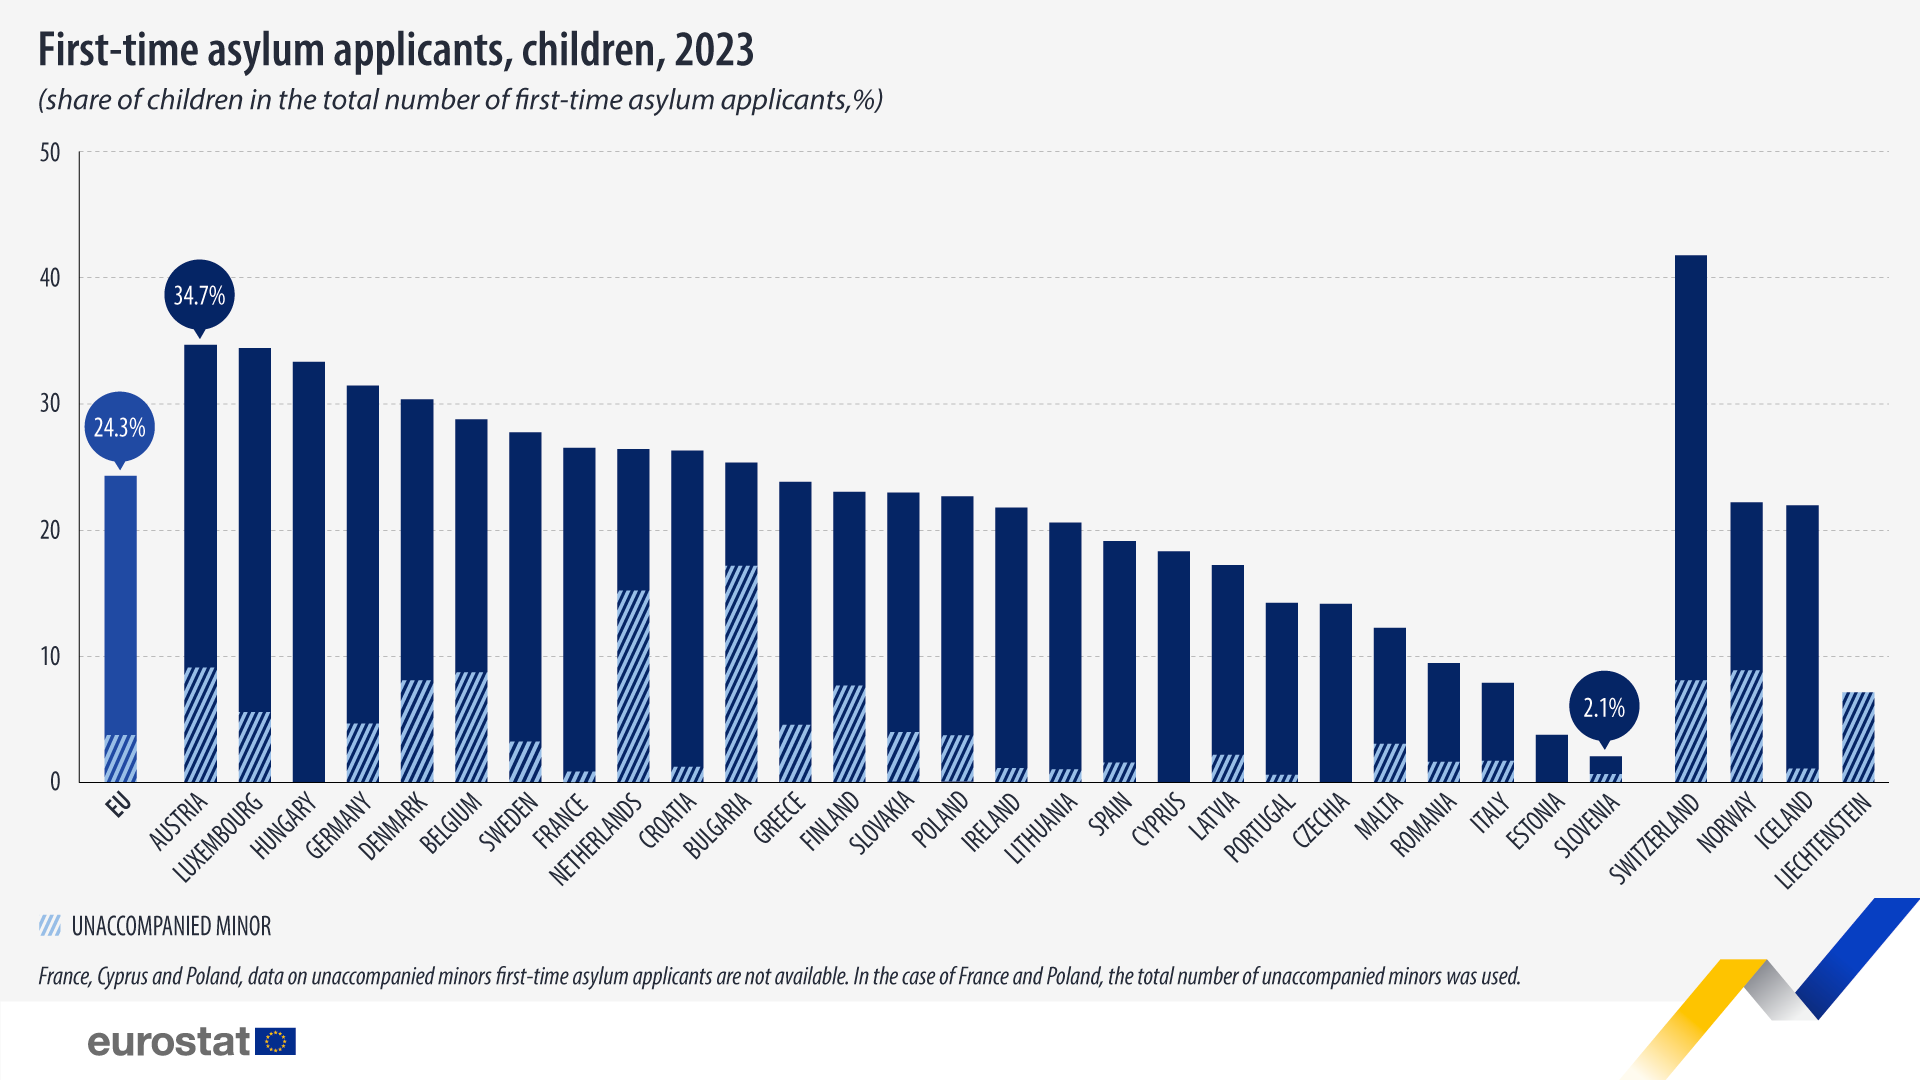 First-time asylum, children, 2023, share of children in the total number of first-time asylum applicants, %. Chart. See link to full dataset below.